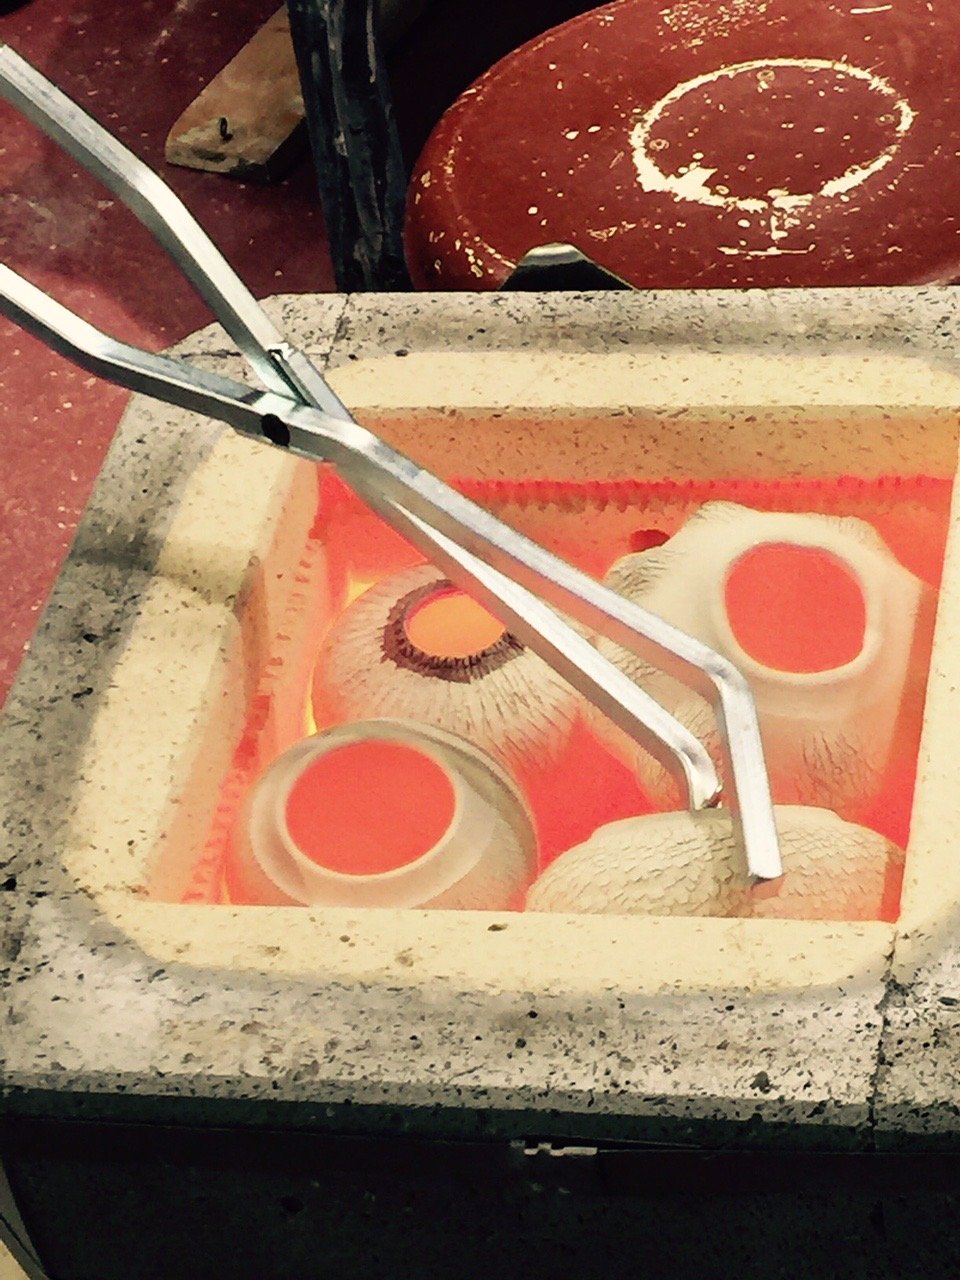   Image: Pulling pieces from hot kiln, ready to dunk in obvara slurry – as with raku – to complete finish.  